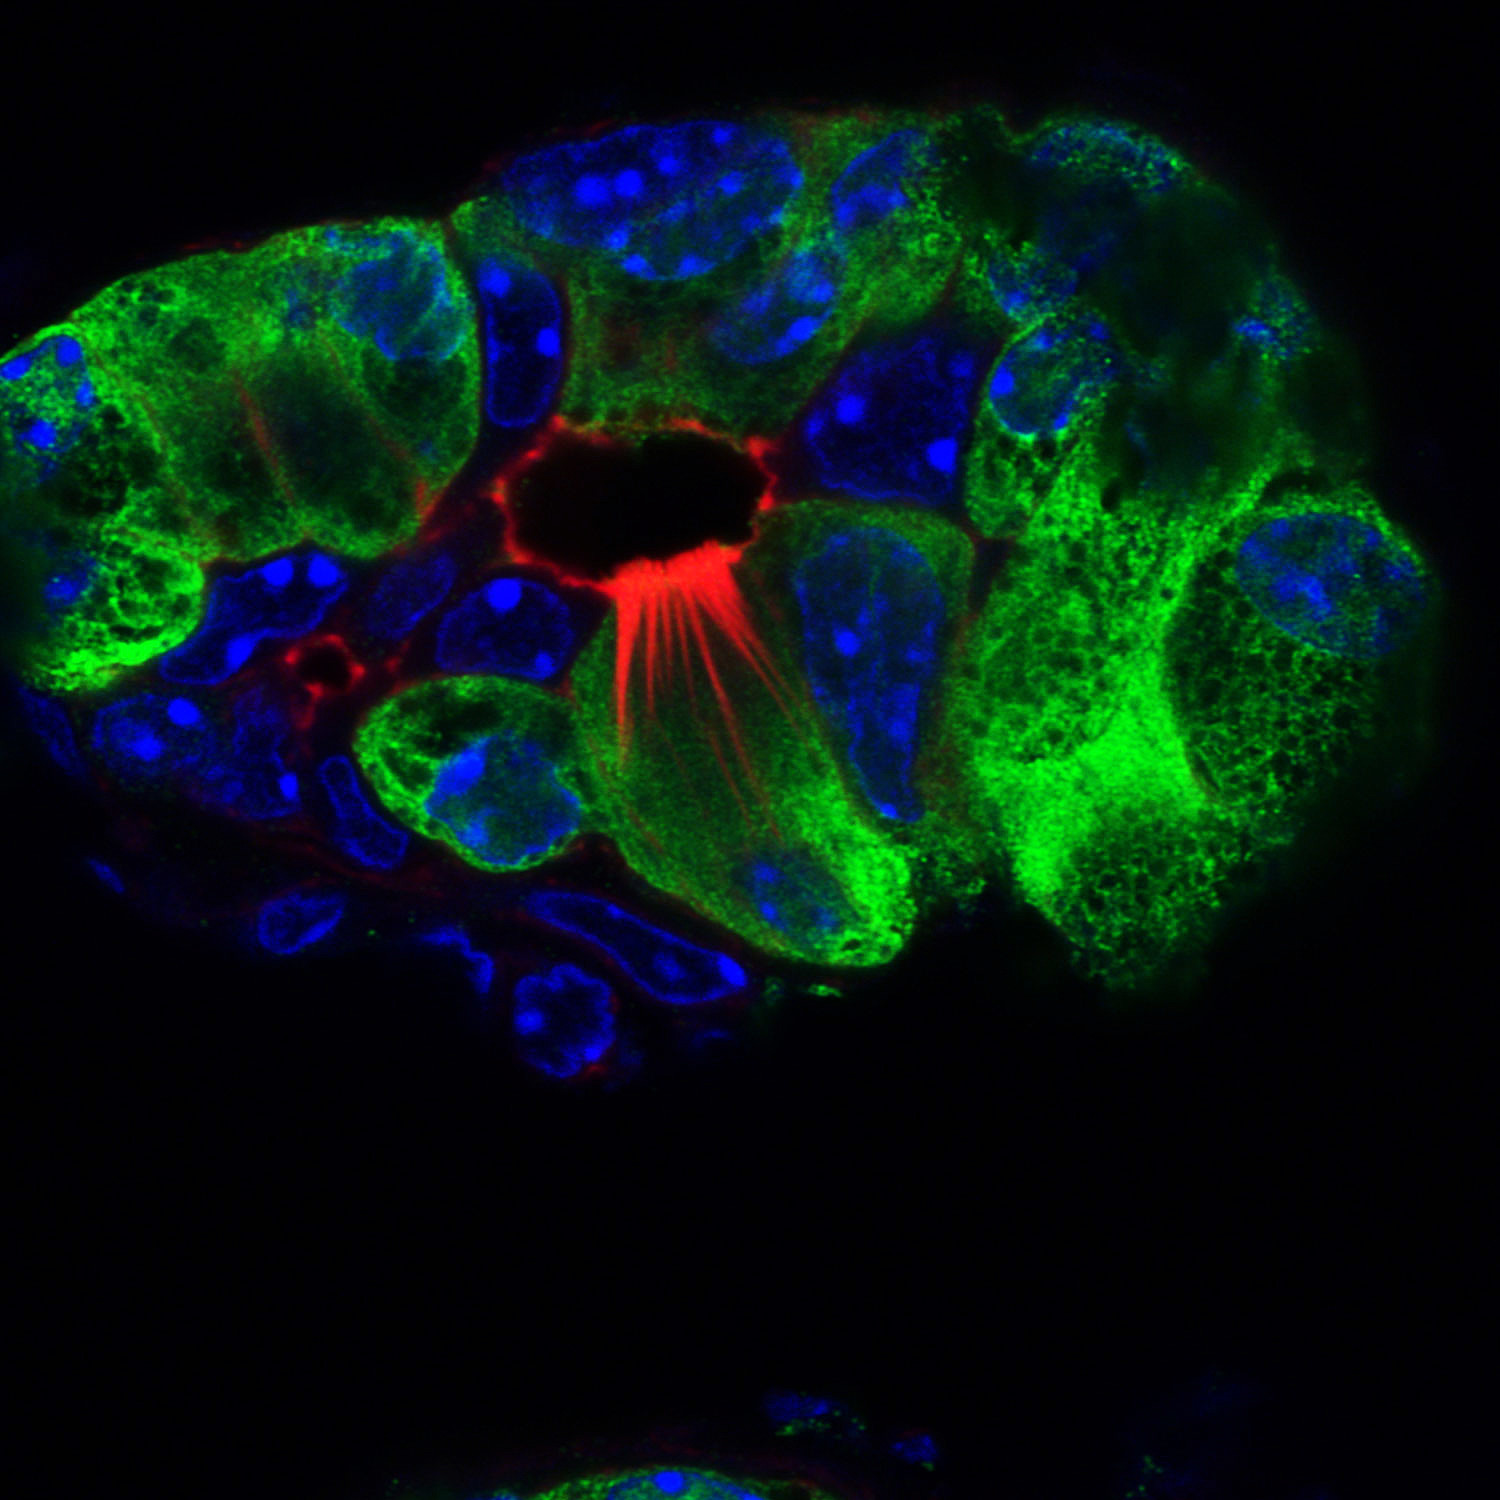 Pancreatitis is a major risk factor for pancreatic cancer. We have identified formation of these rare cell populations in the injured pancreas and are currently investigating their role in injury, healing, and pancreatic regeneration (Red, Actin; Green, YFP).